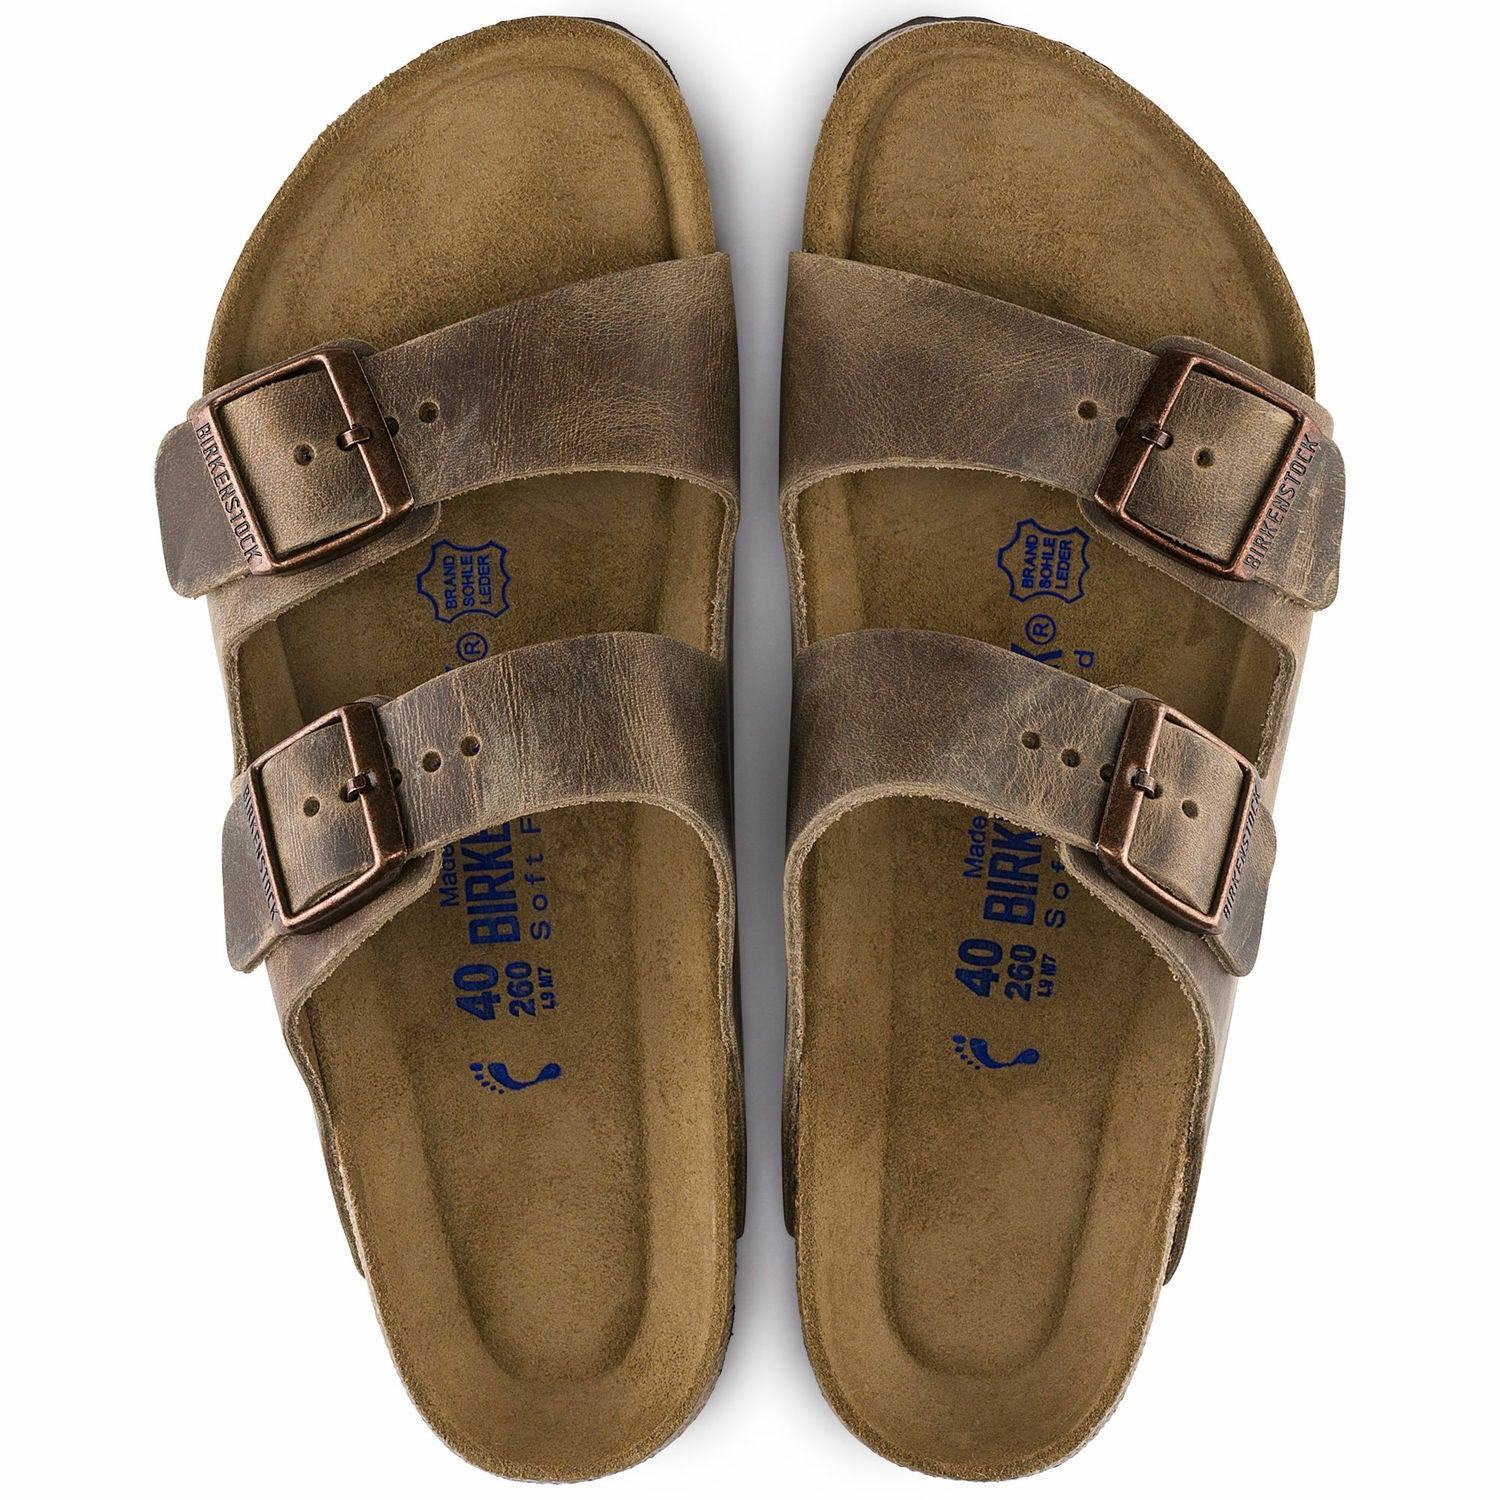 Birkenstock Arizona Tobacco Brown SoftFootbed Uni-Sex - All Mixed Up 